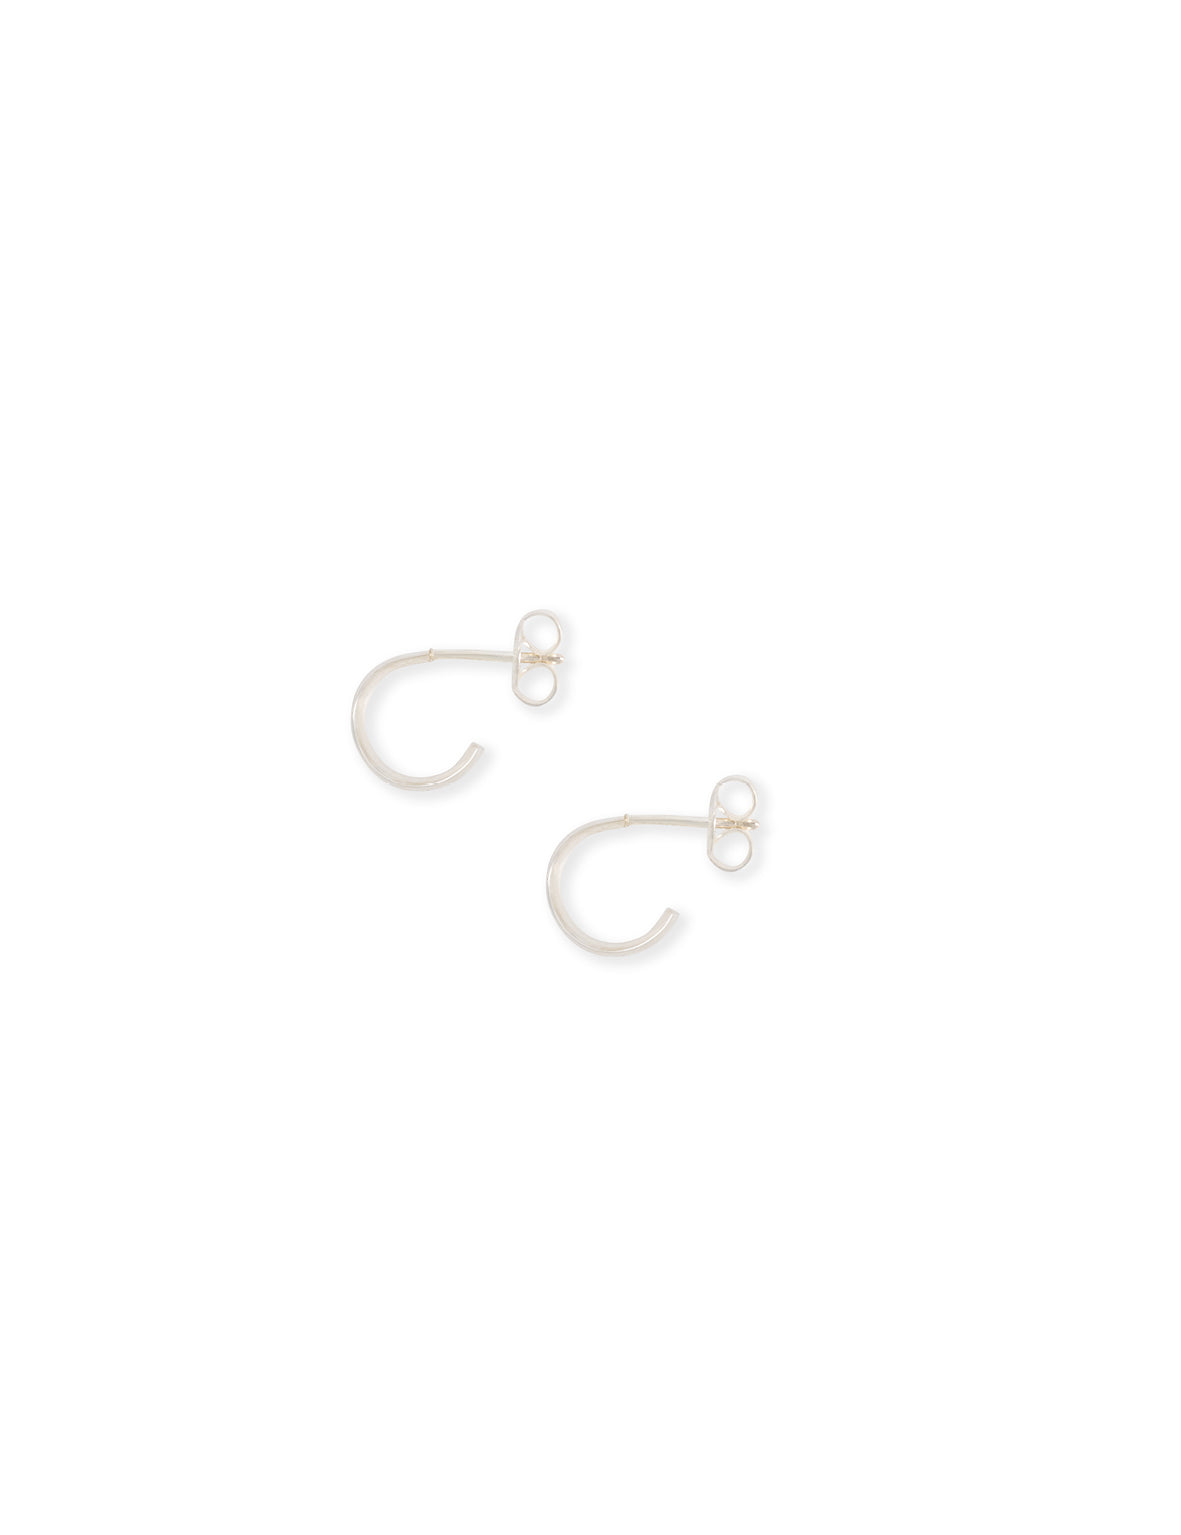 Curl Small Hoop - Silver